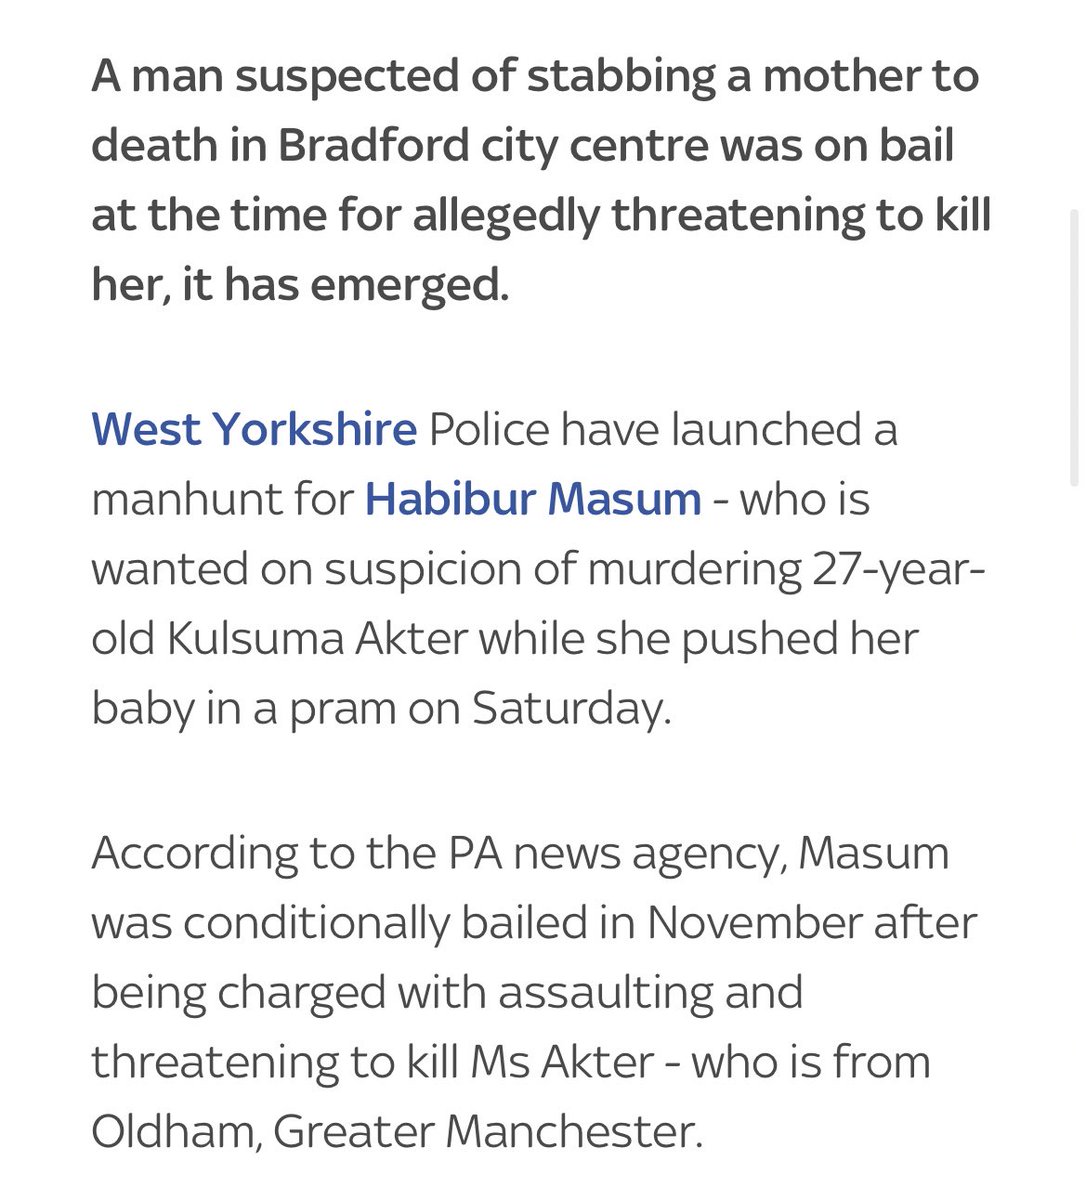 > Tory Britain > Arrive in the UK to study at the University of Bedfordshire from Bangladesh > Get graduate visa > Arrested and bailed for threatening to kill > Not immediately deported > Goes on to murder a mother Open borders to the worlds scum